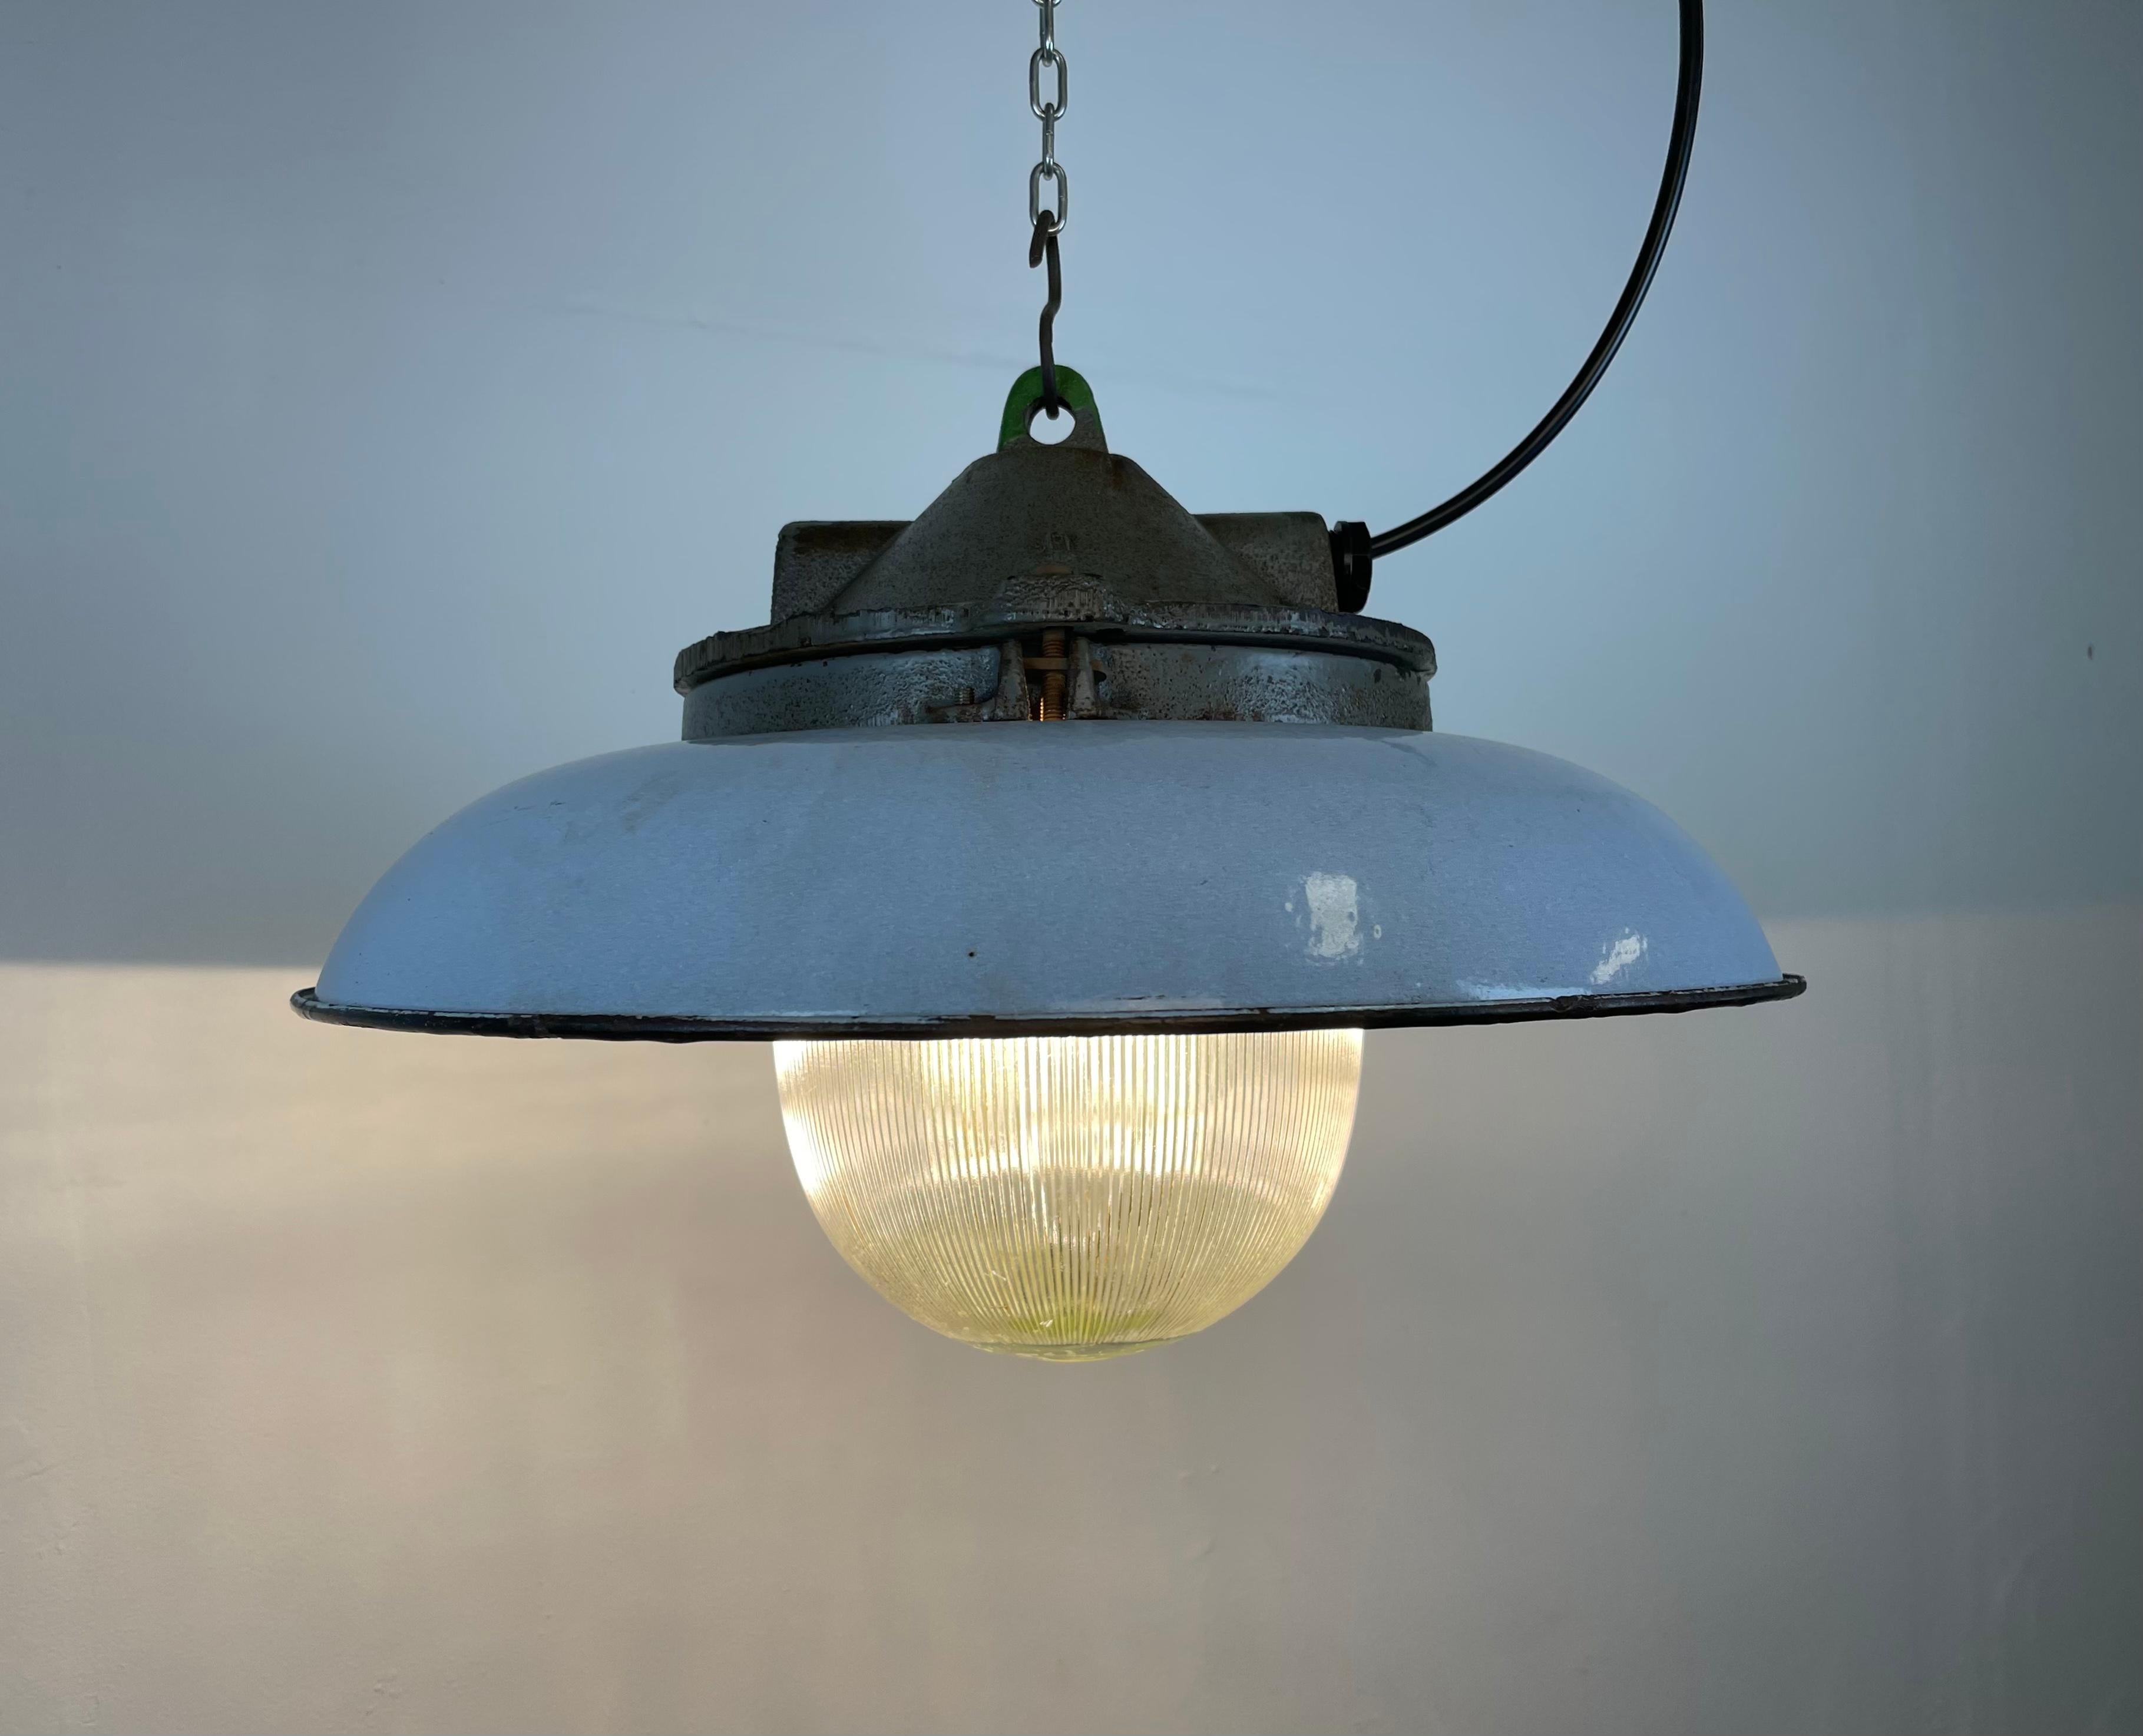 Industrial Blue Enamel Factory Pendant Lamp in Cast Iron from Zaos, 1960s For Sale 5